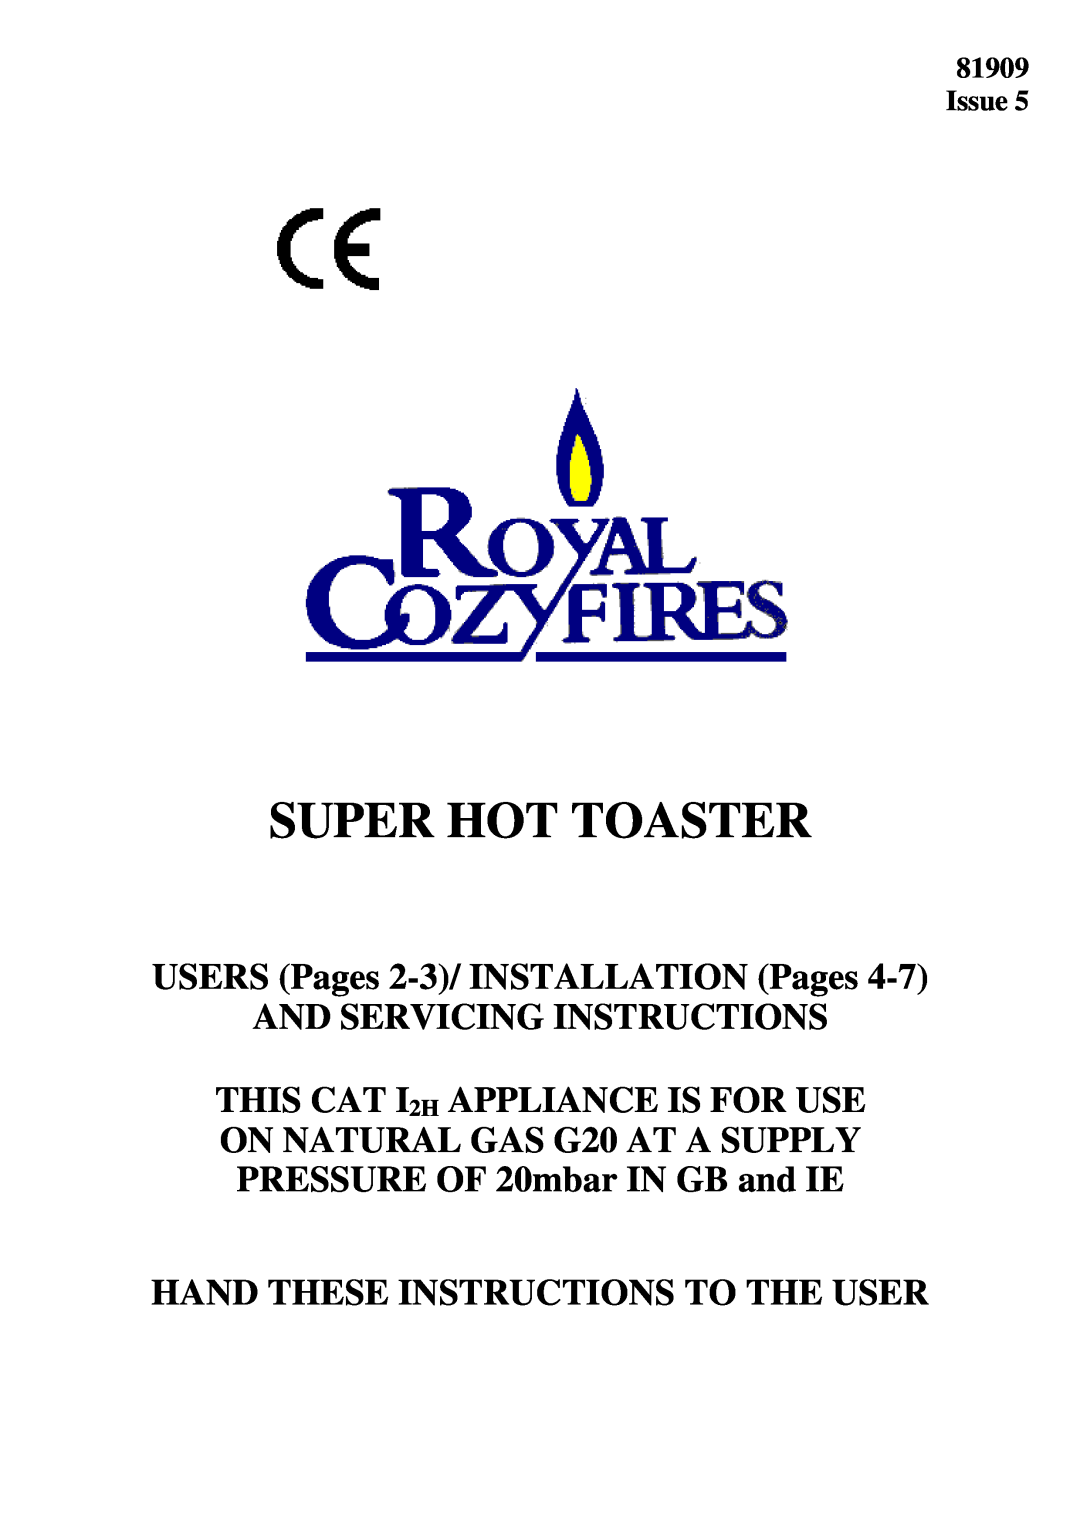 Royal Consumer Information Products Super Hot Toater manual Super Hot Toaster, USERS Pages 2-3/INSTALLATION Pages, Issue 